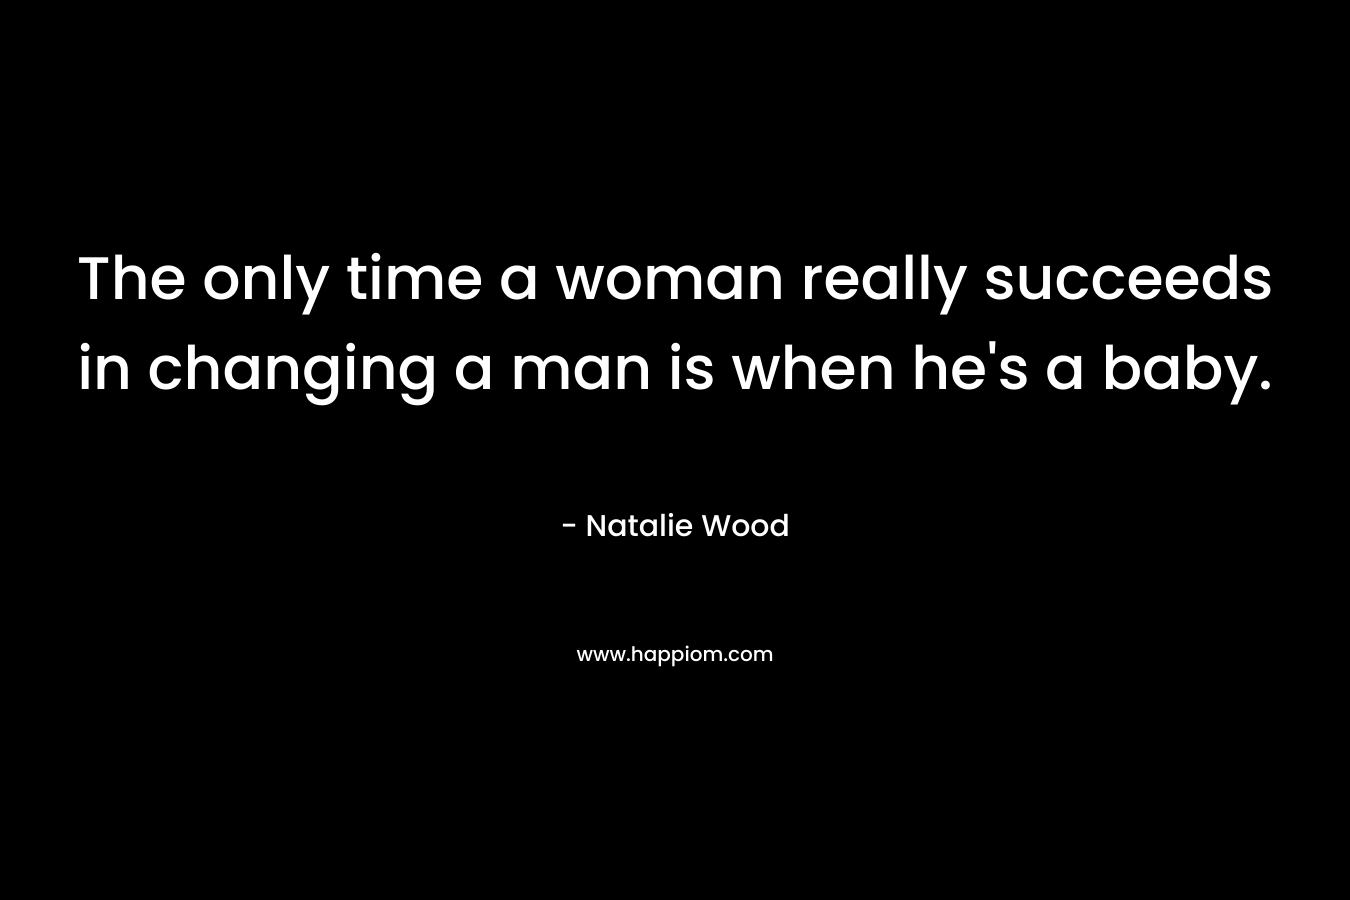 The only time a woman really succeeds in changing a man is when he's a baby.